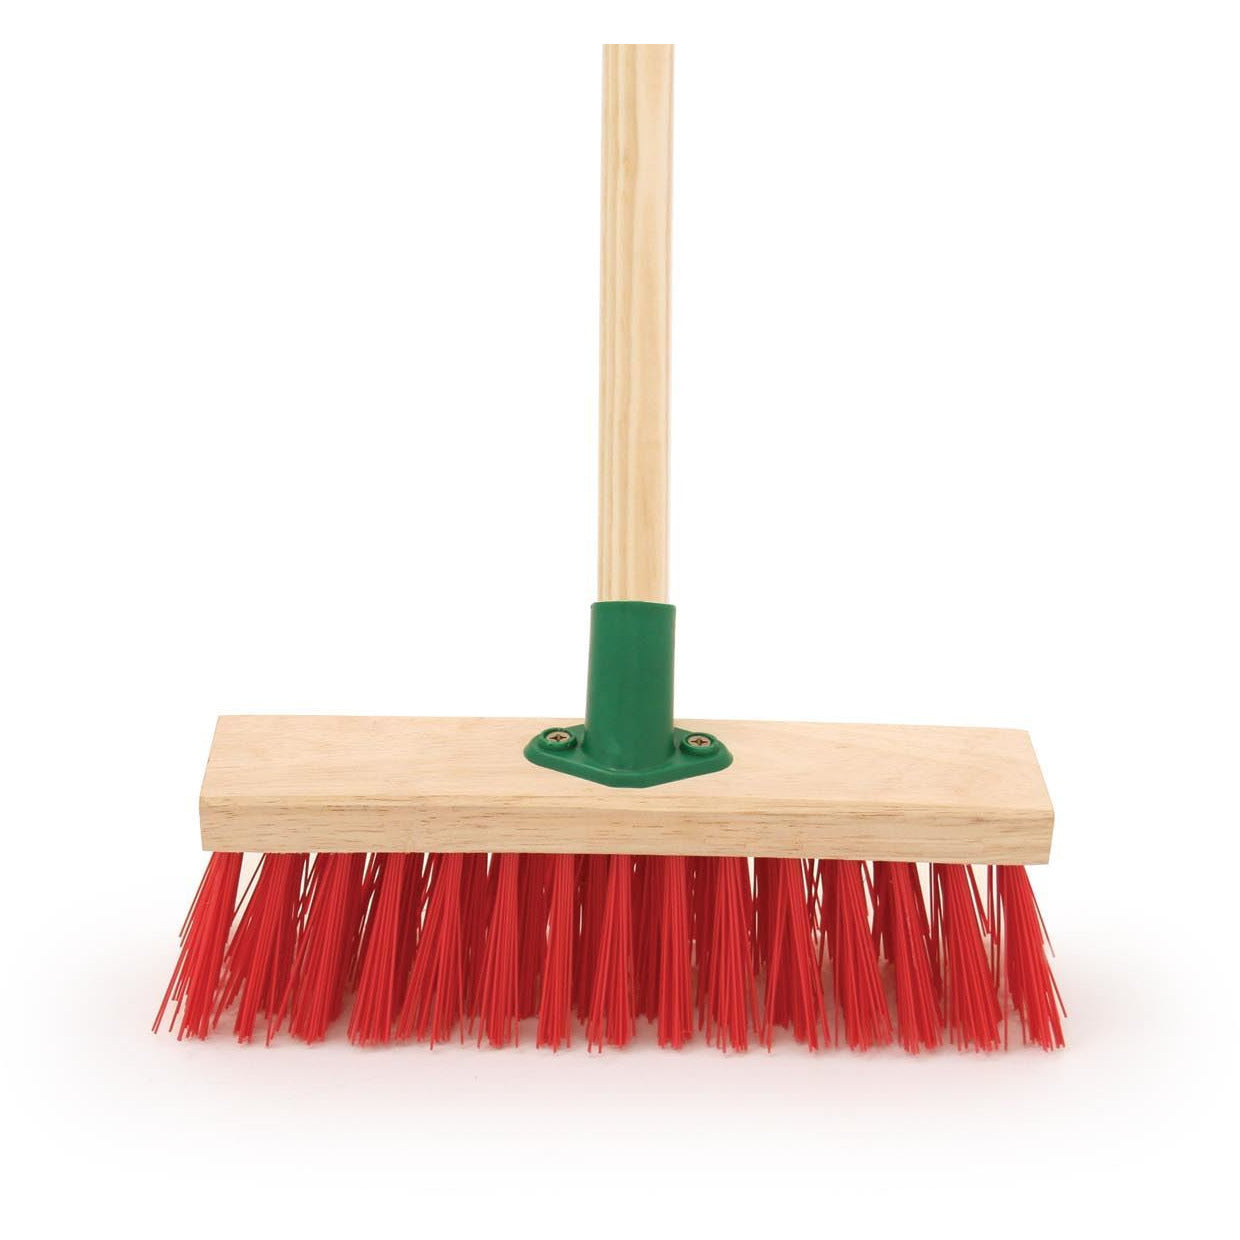 12" Stiff Red PVC Broom, Stiff Outdoor Sweeping Brush - The Dustpan and Brush Store